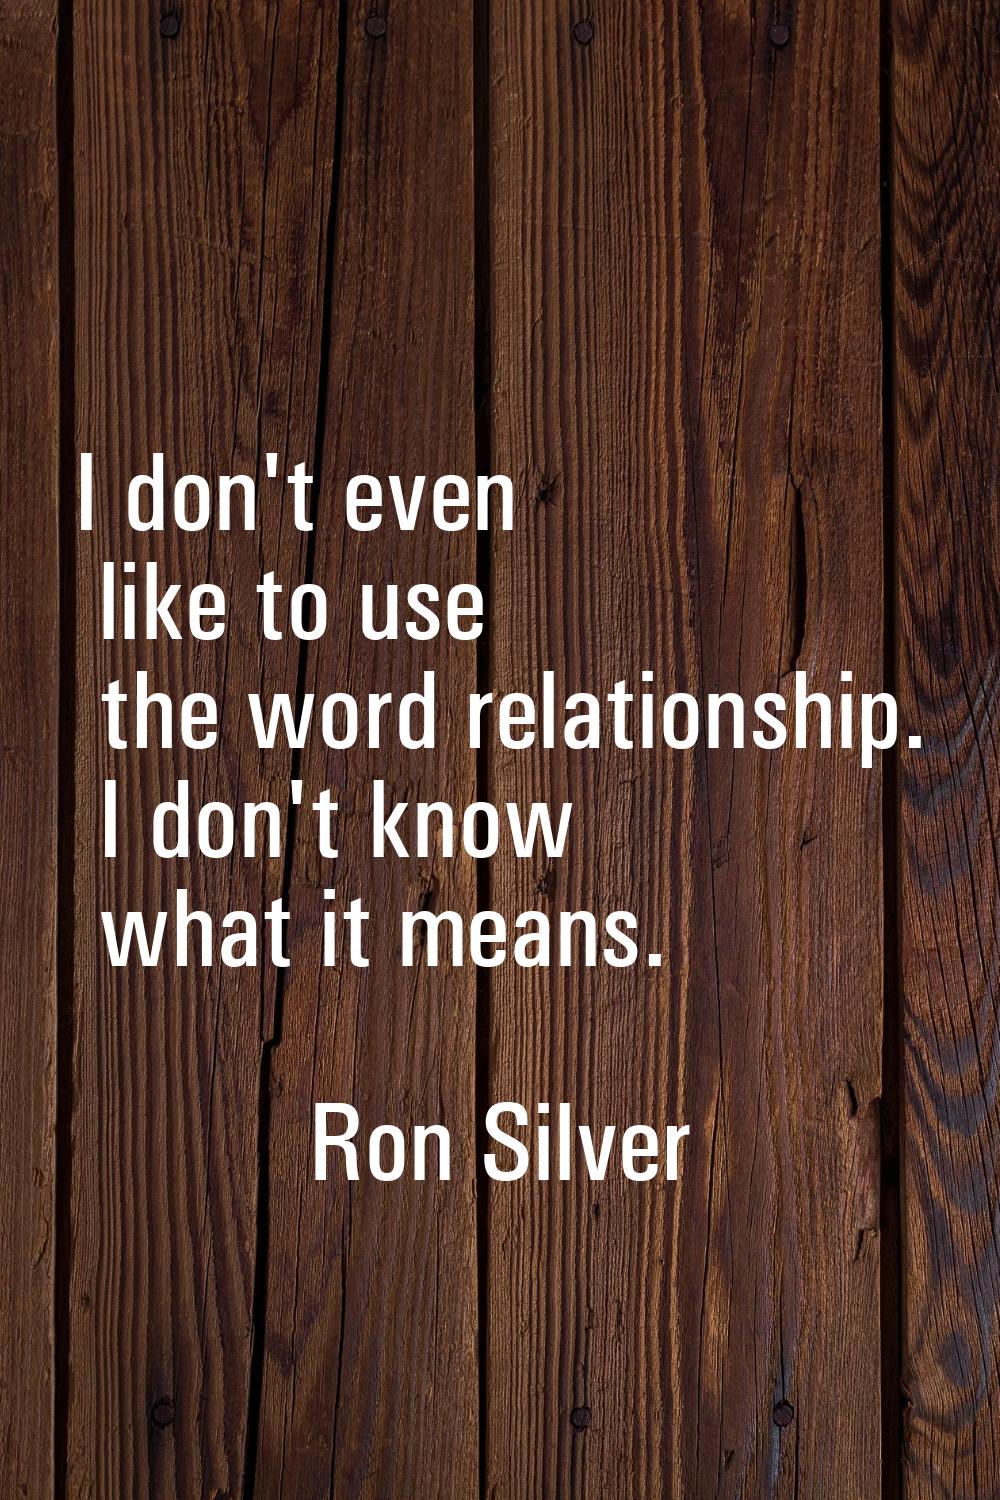 I don't even like to use the word relationship. I don't know what it means.